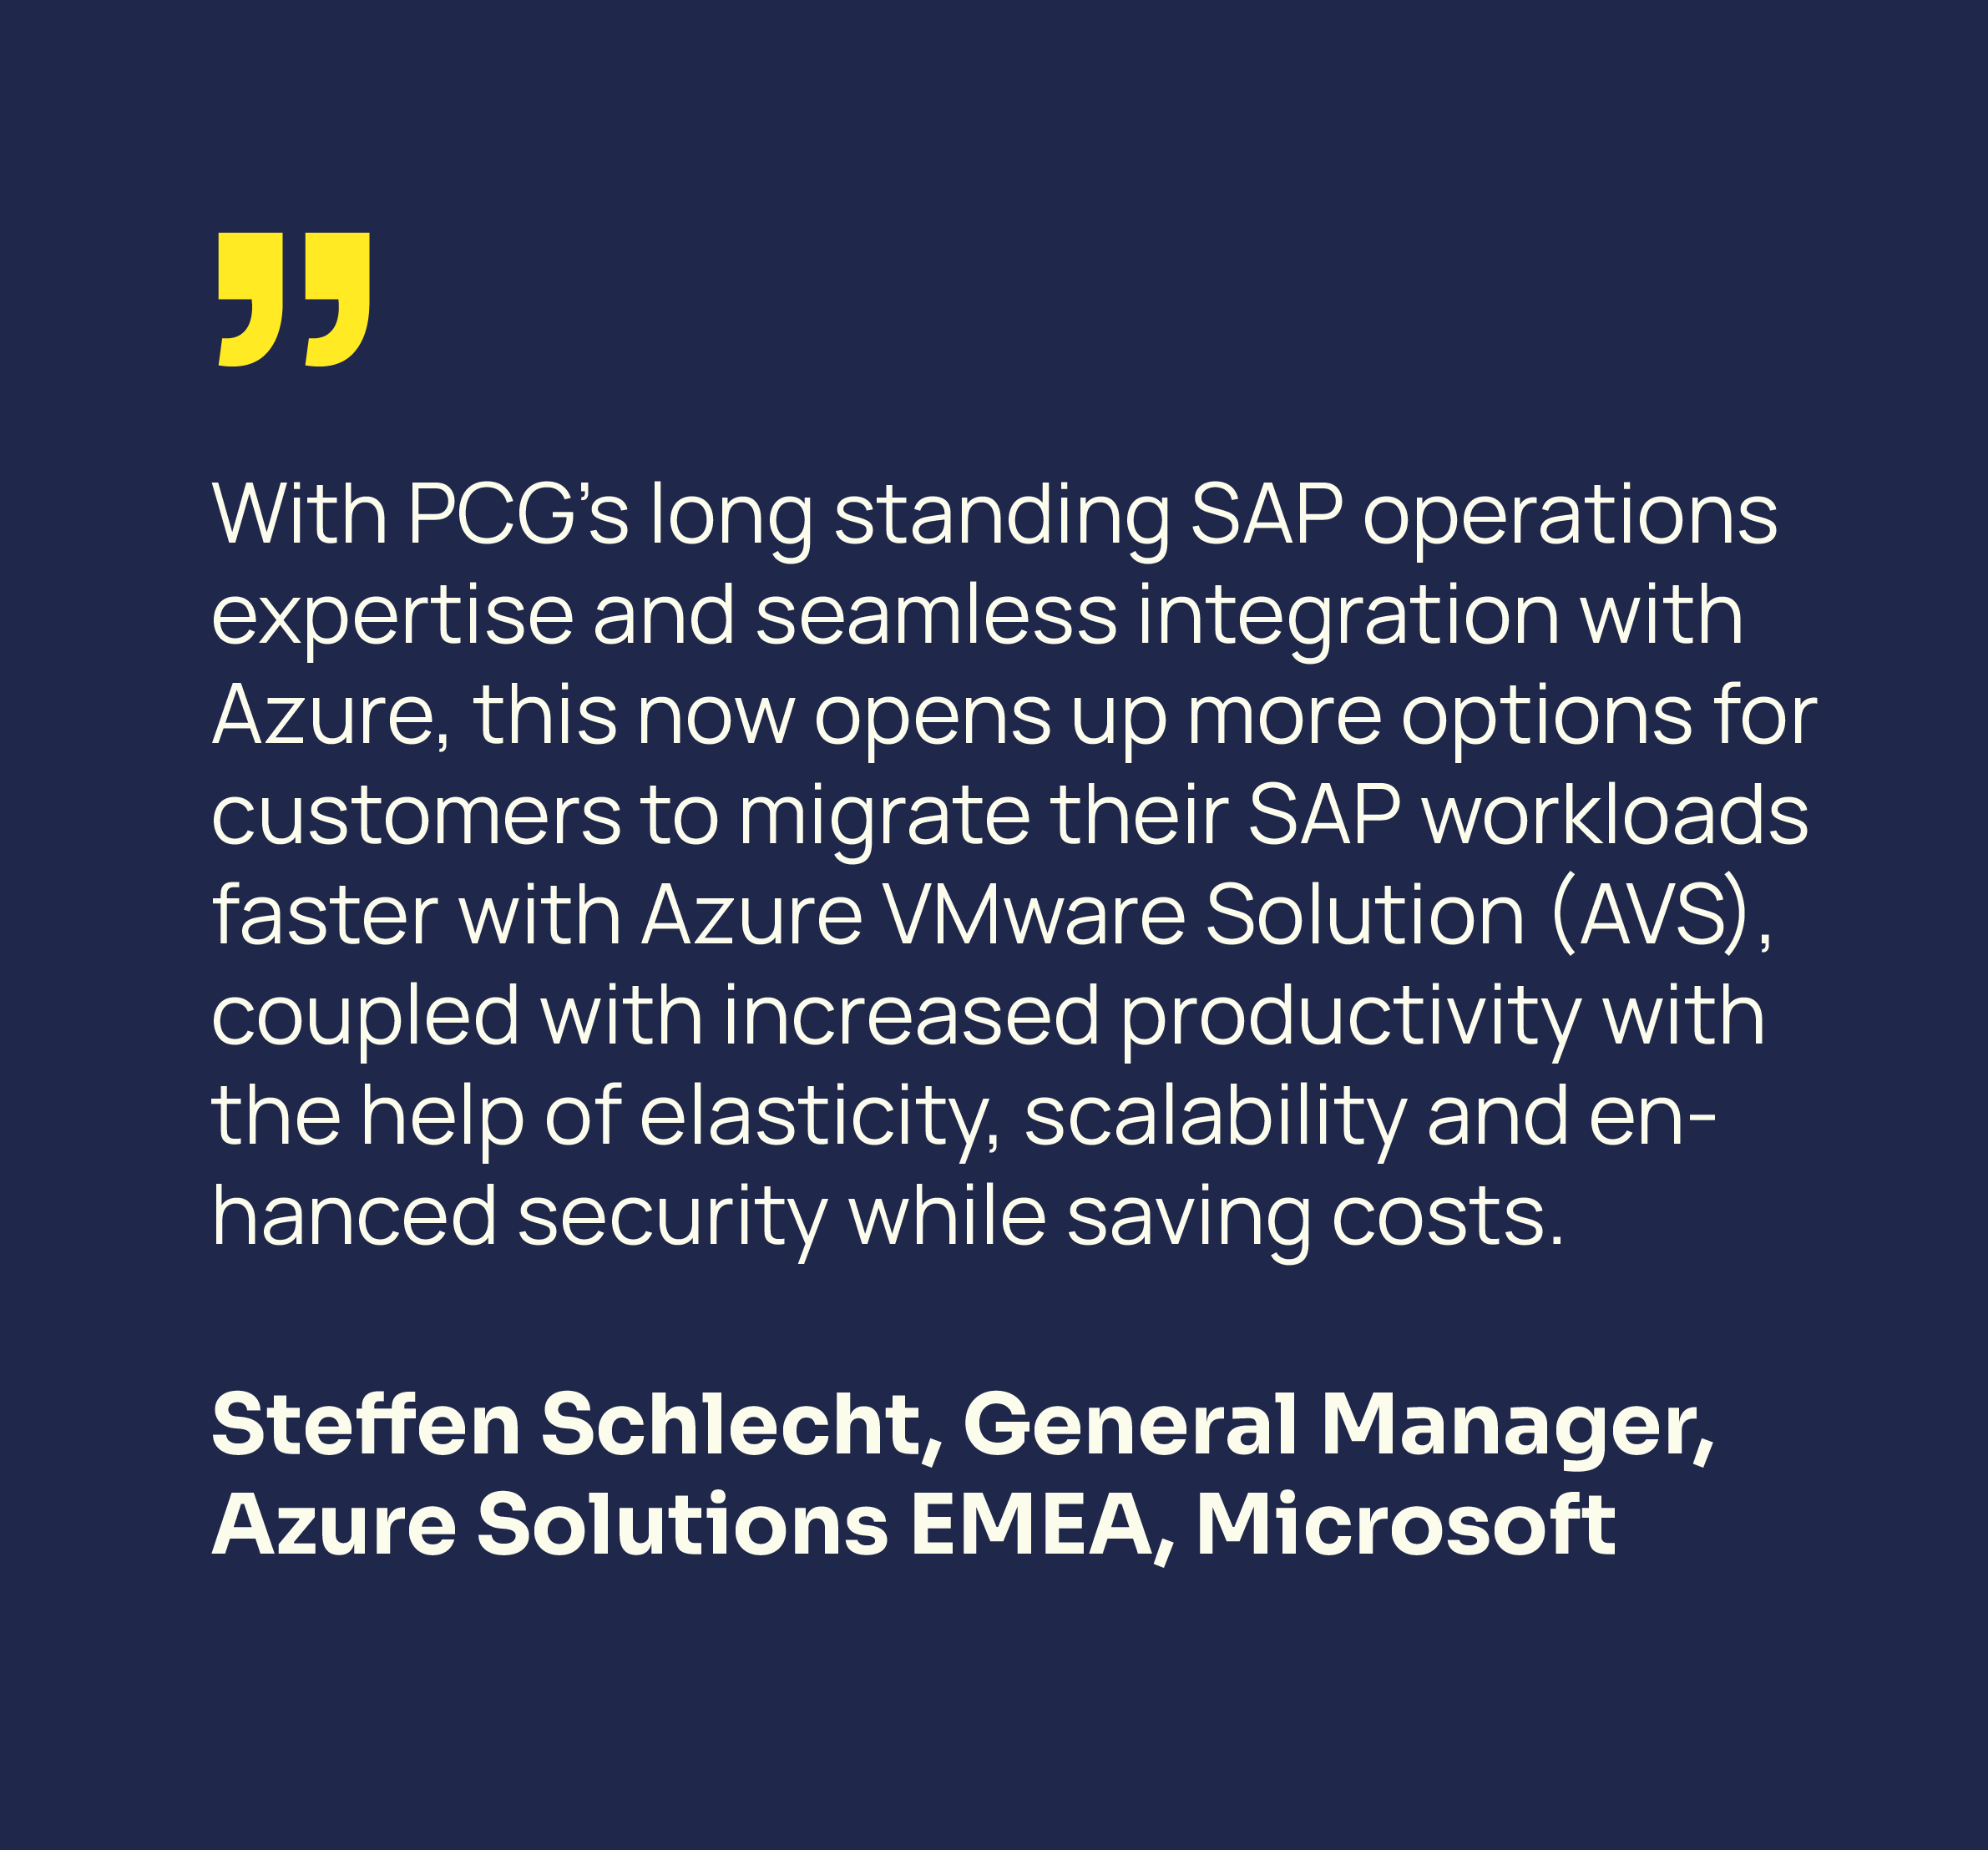 “With PCG's long standing SAP operations expertise and seamless integration with Azure, this now opens up more options for customers to migrate their SAP workloads faster with Azure VMware Solution (AVS), coupled with increased productivity with the help of elasticity, scalability and enhanced security while saving costs.”